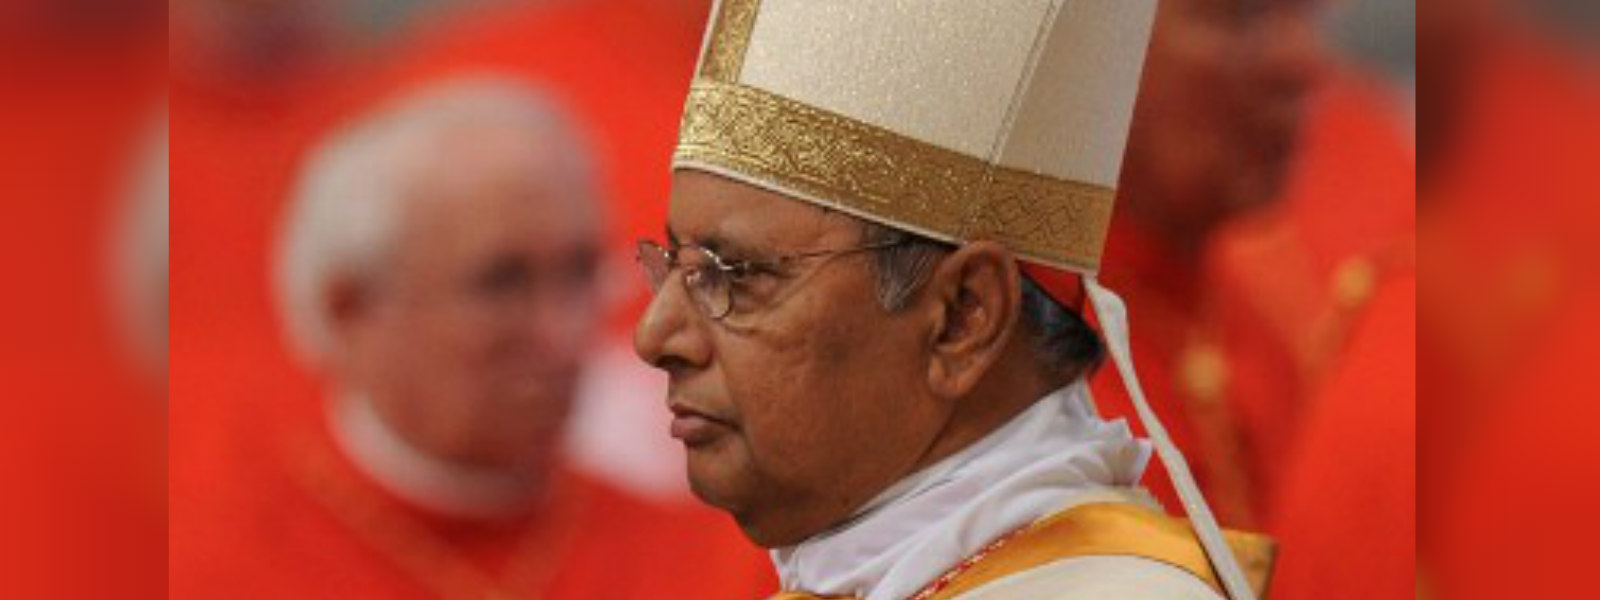 Amend the existing laws-Malcolm Cardinal Ranjith